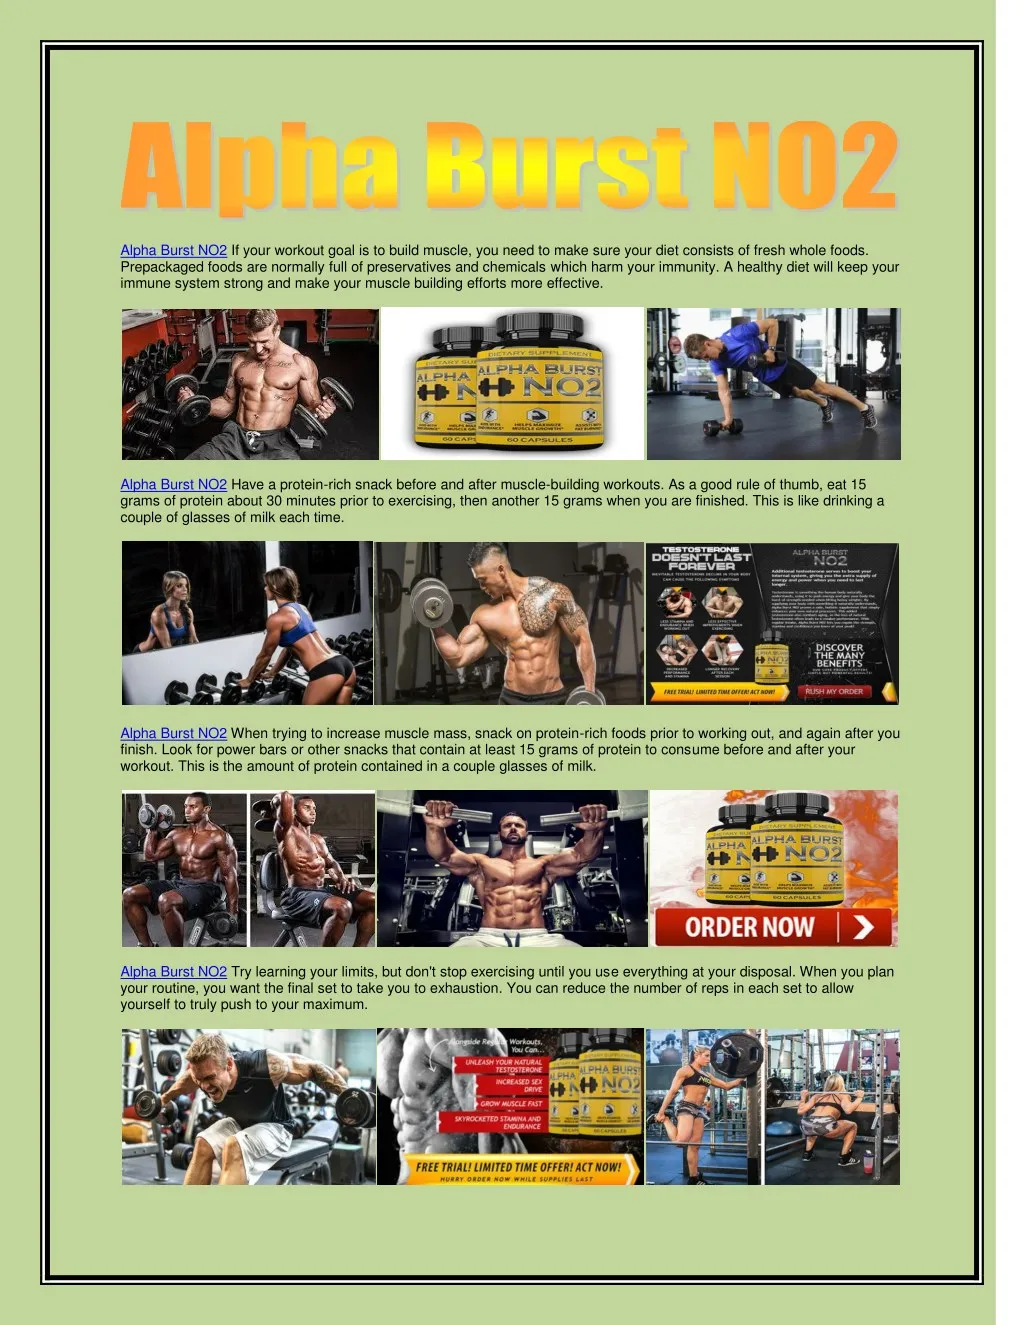 alpha burst no2 if your workout goal is to build